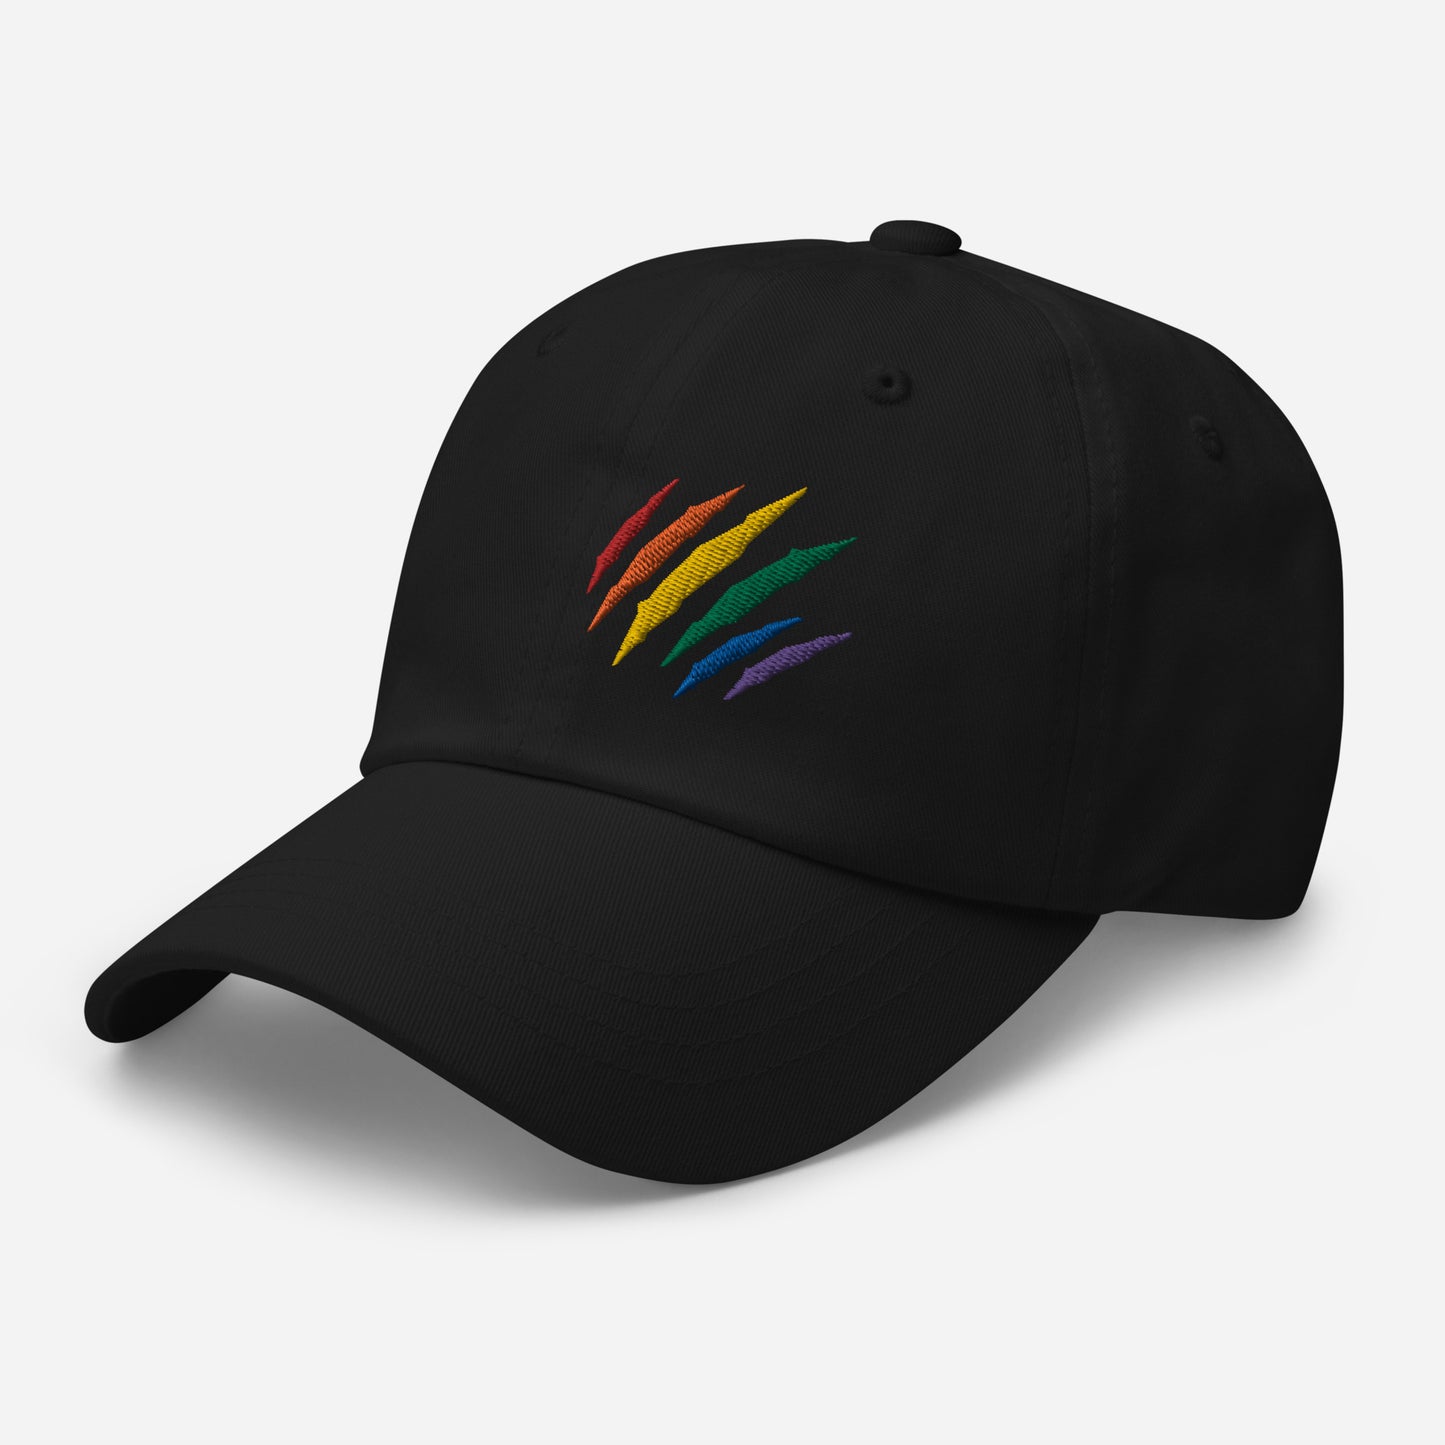 Black baseball hat featuring rainbow pride scratch mark embroidery with a low profile, adjustable strap.